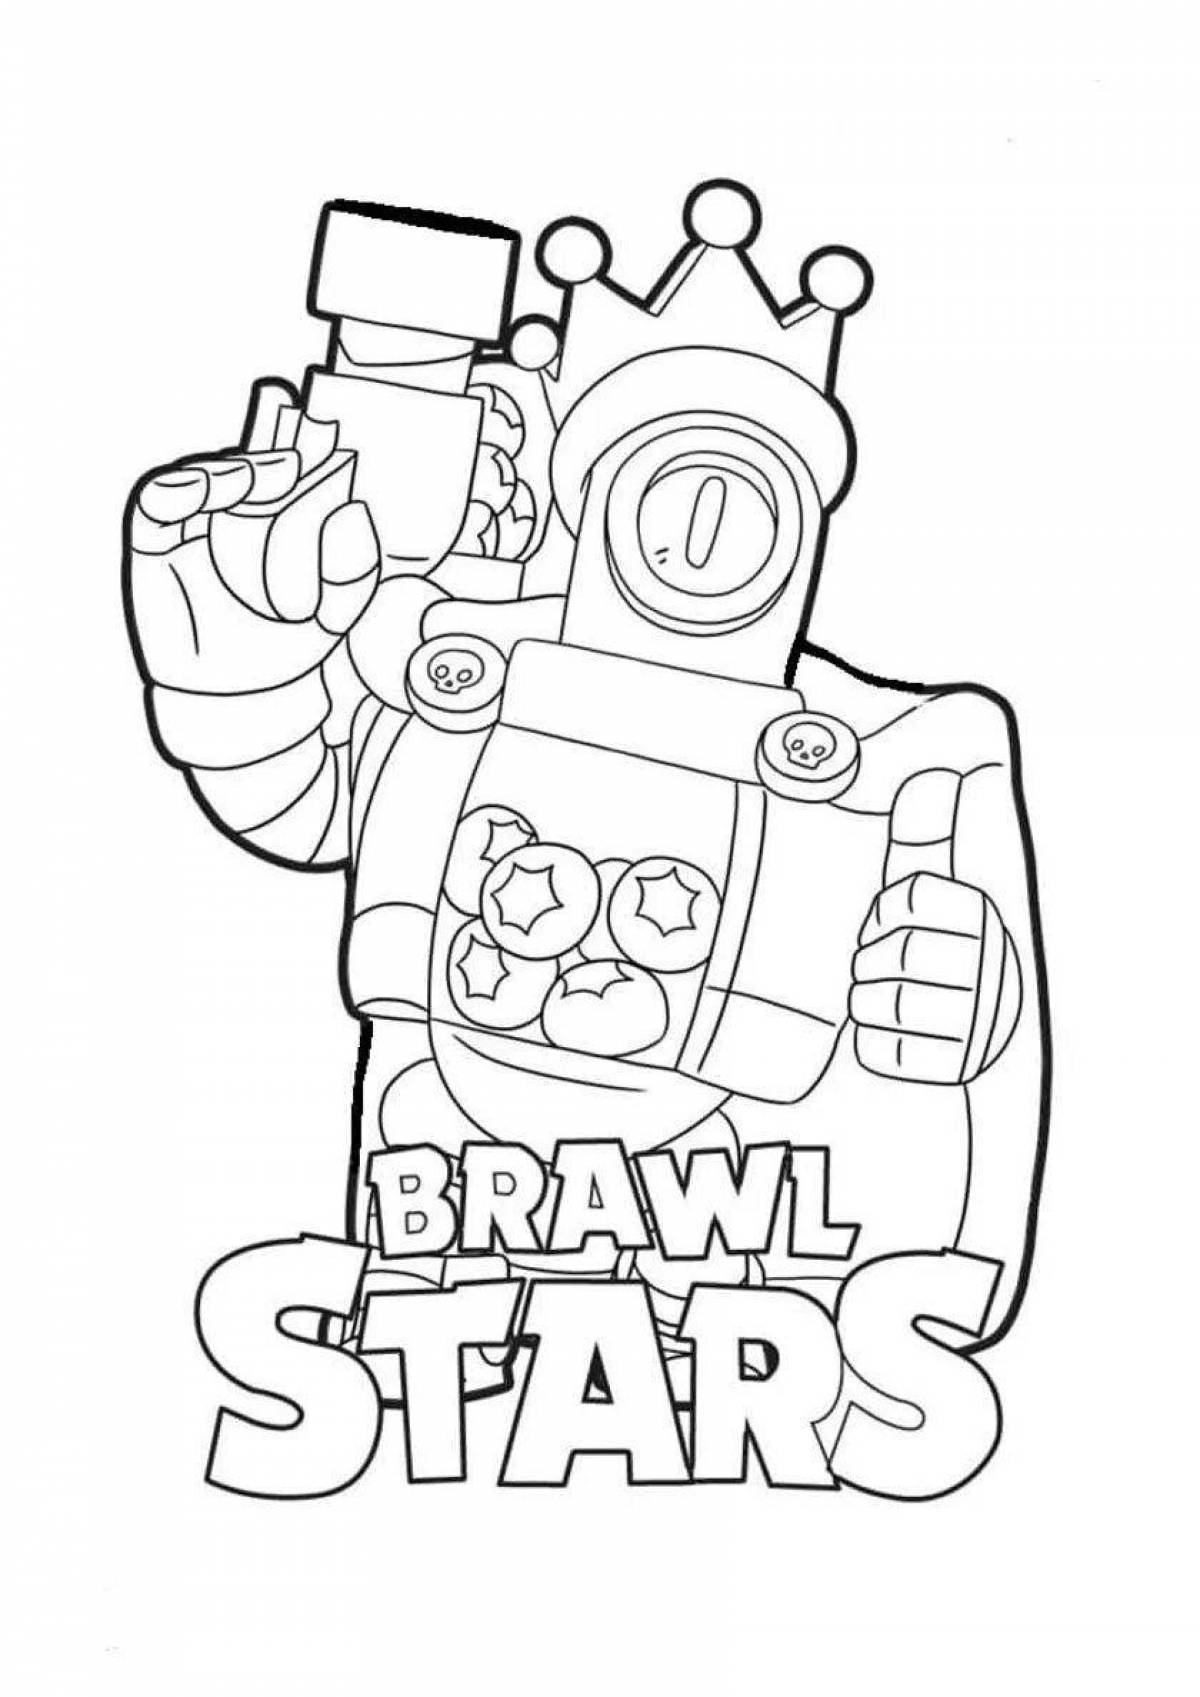 Color-frenzy brow start coloring page